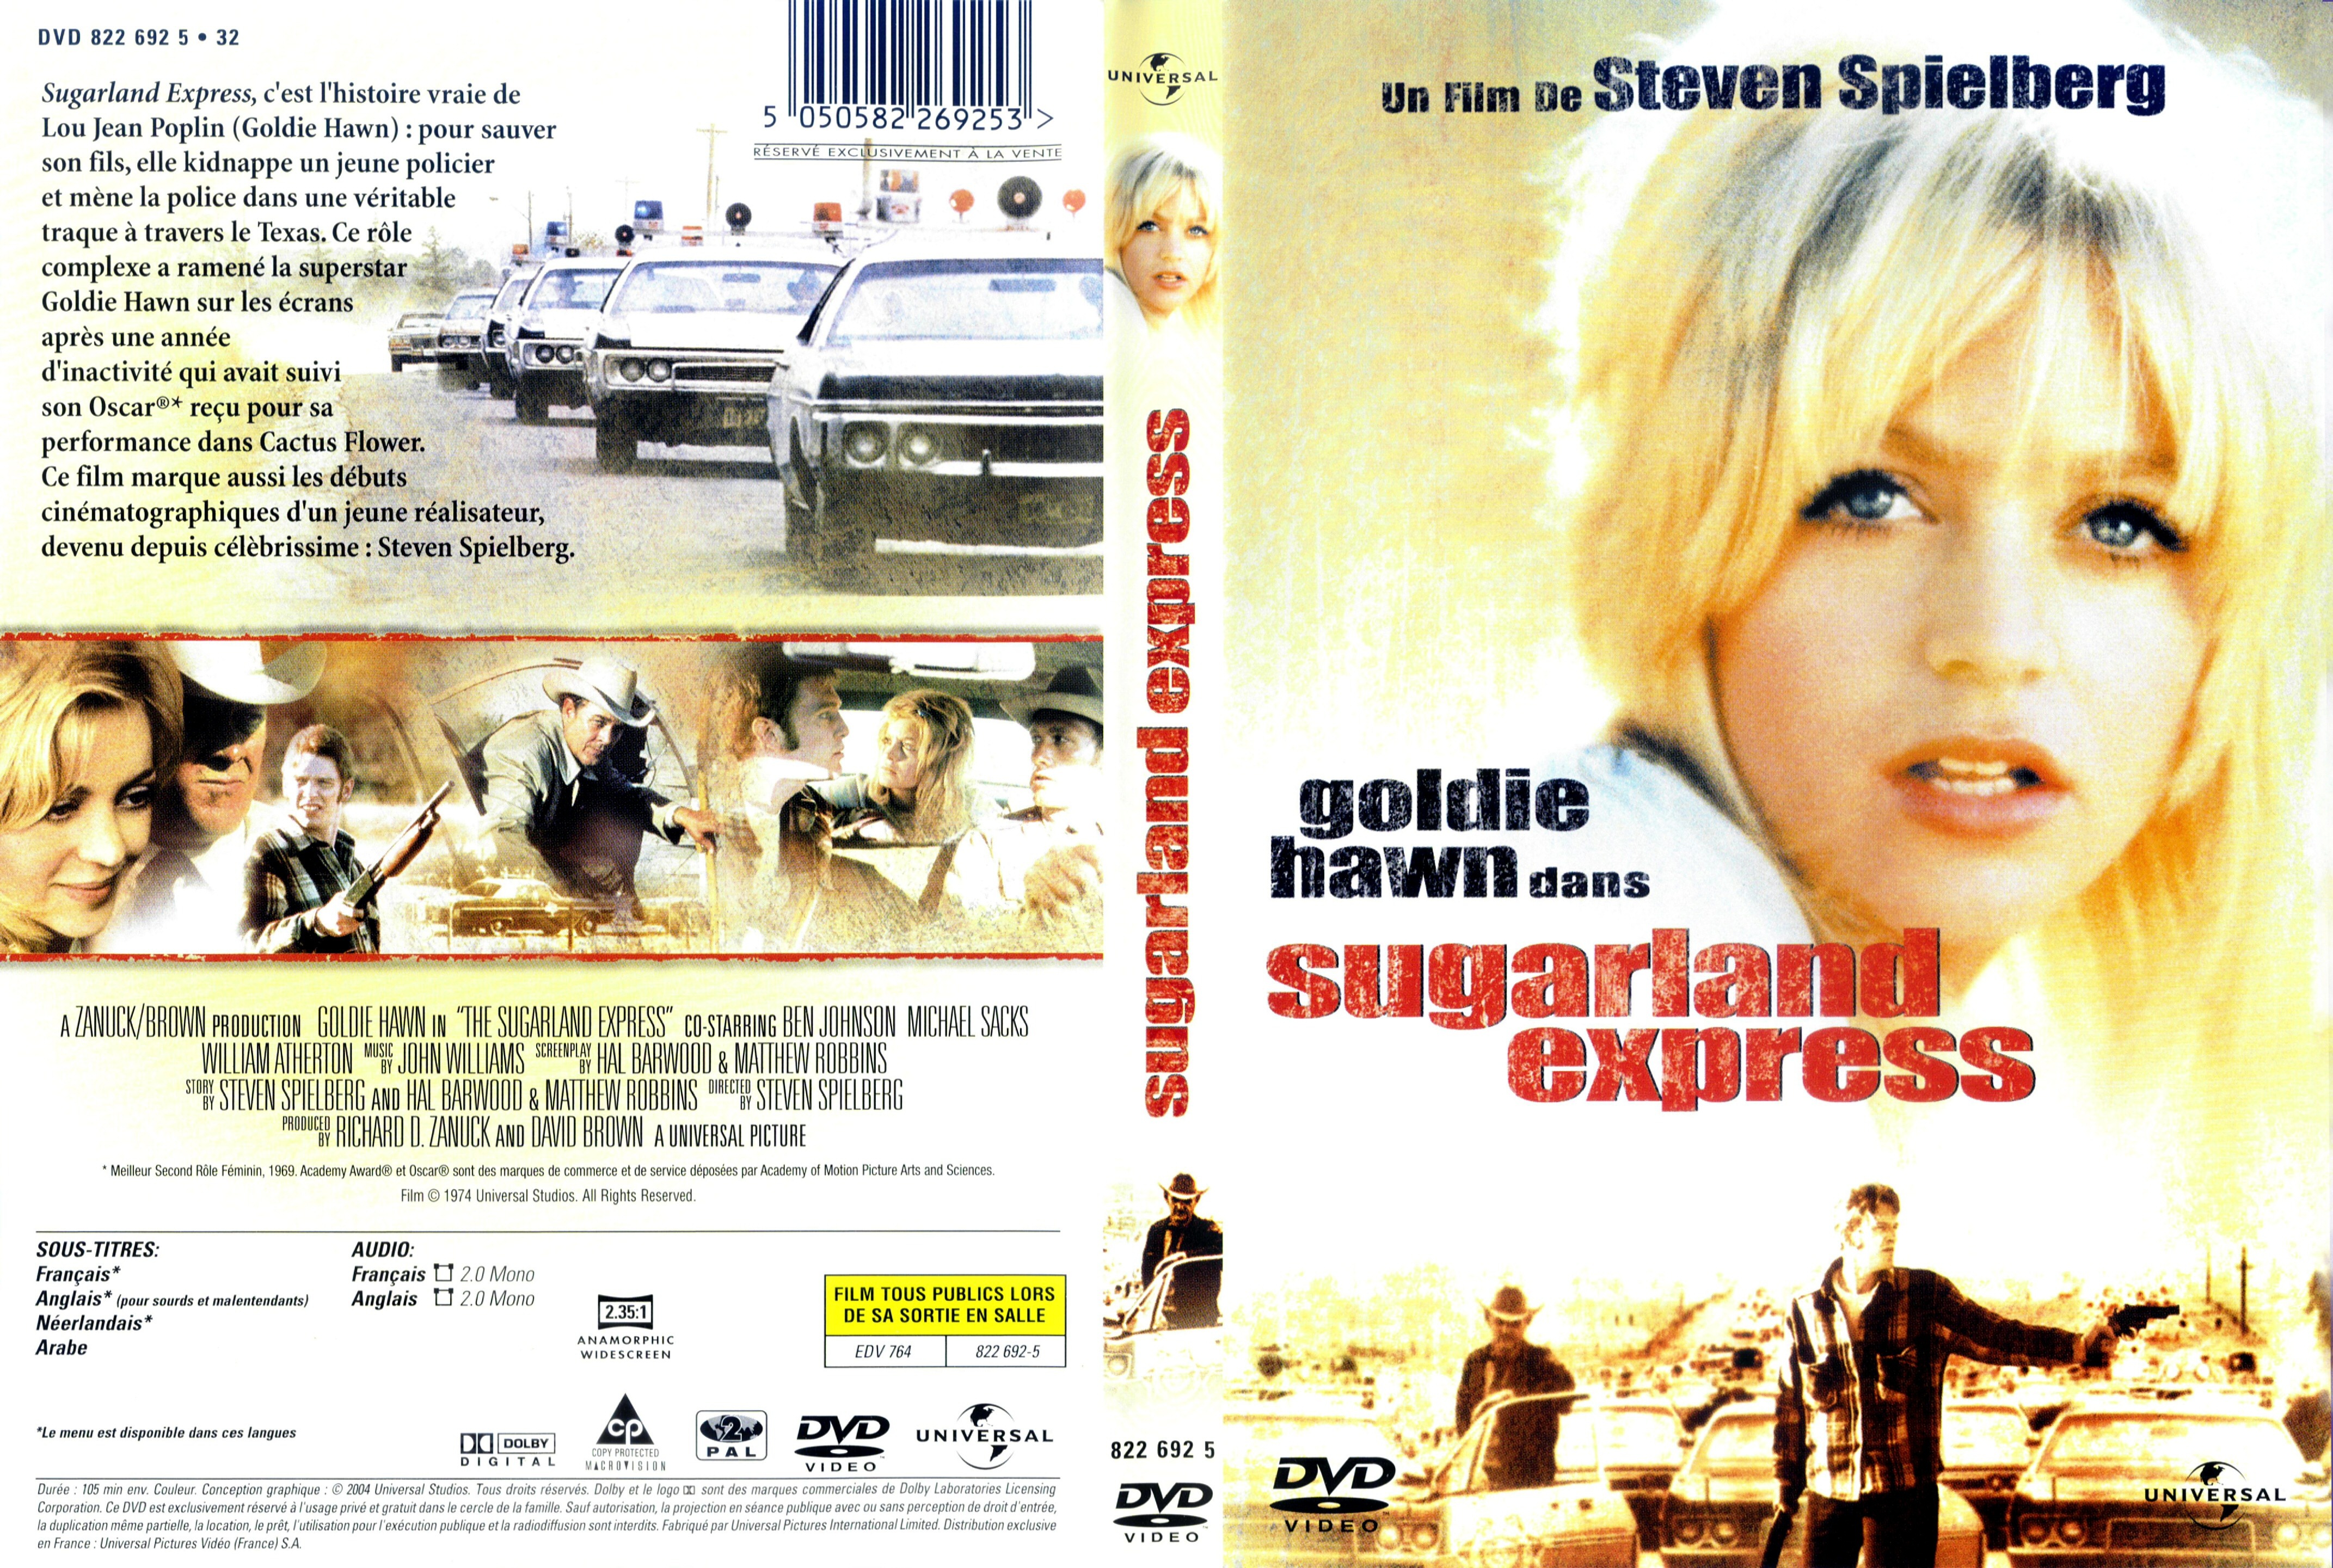 Jaquette DVD Sugarland express